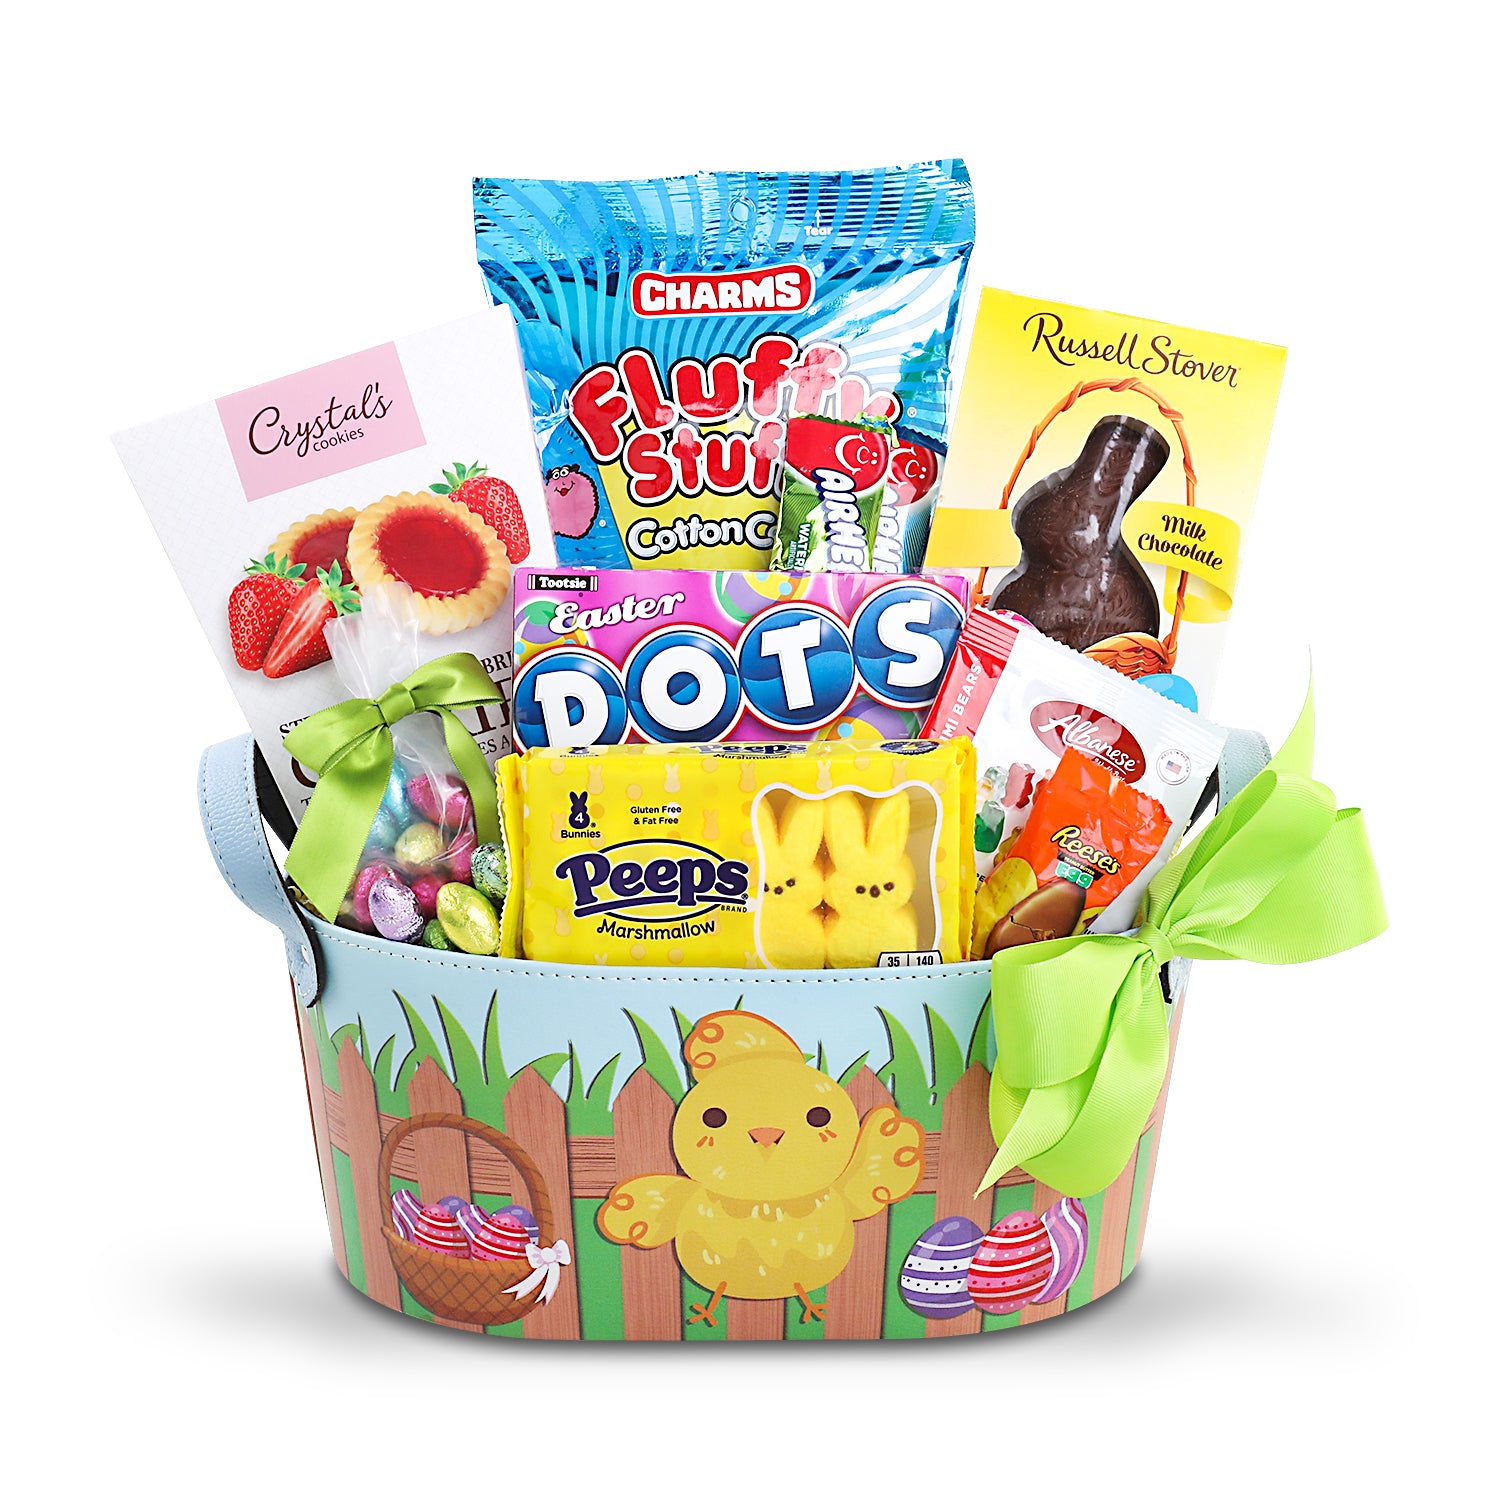 Crystal’s Strawberry Filled Shortbread Cookies (3oz.), Charms Fluffy Stuff Cotton Candy (2.5oz.), Palmer Chocolate Easter Bunny(1.5oz.), Peeps Marshmallow Bunnies (4ct.), Reese’s Peanut Butter Egg (0.6oz.), Dots Candy Box (6oz.), Albanese 12 Assorted Flavors Gummi Bears (1oz.), Airheads Assorted (0.55oz.), Chocolate Foiled Eggs (4oz.), Reusable Easter Basket